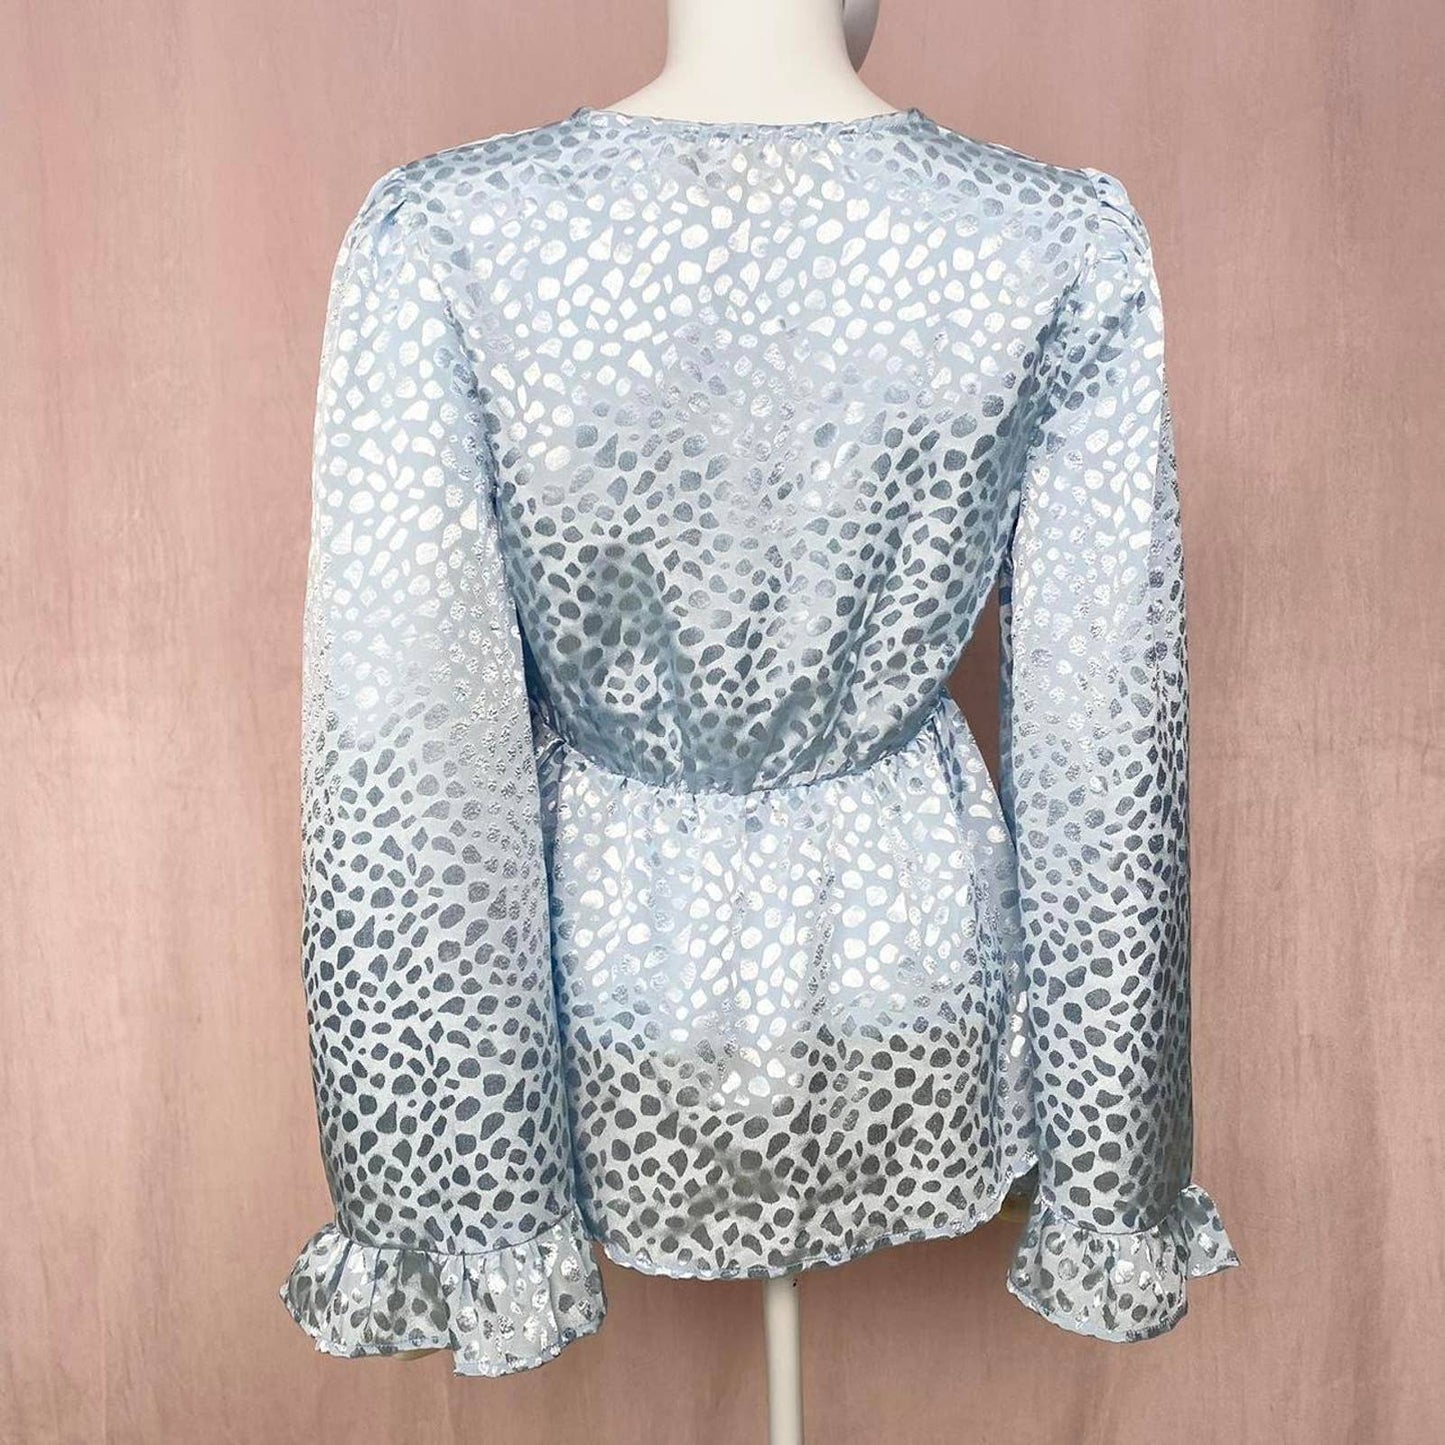 Secondhand Wishing Waves Blue Satin Leopard Print Blouse, Size Small